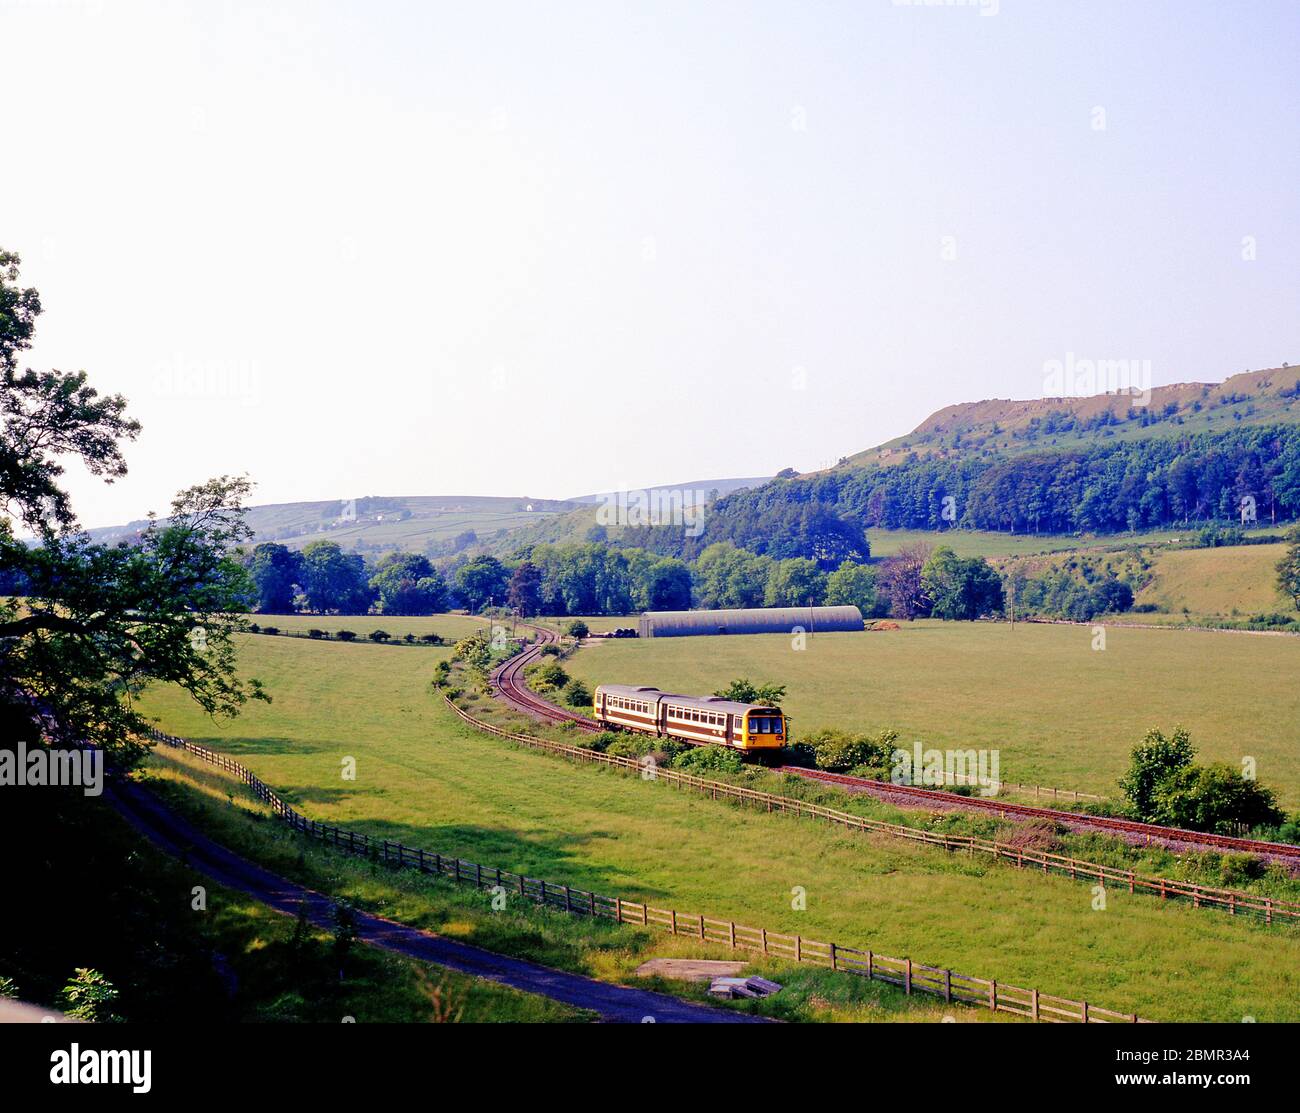 Pacer train, Esk Valley Line, North Yorkshire, England 1989 Stock Photo